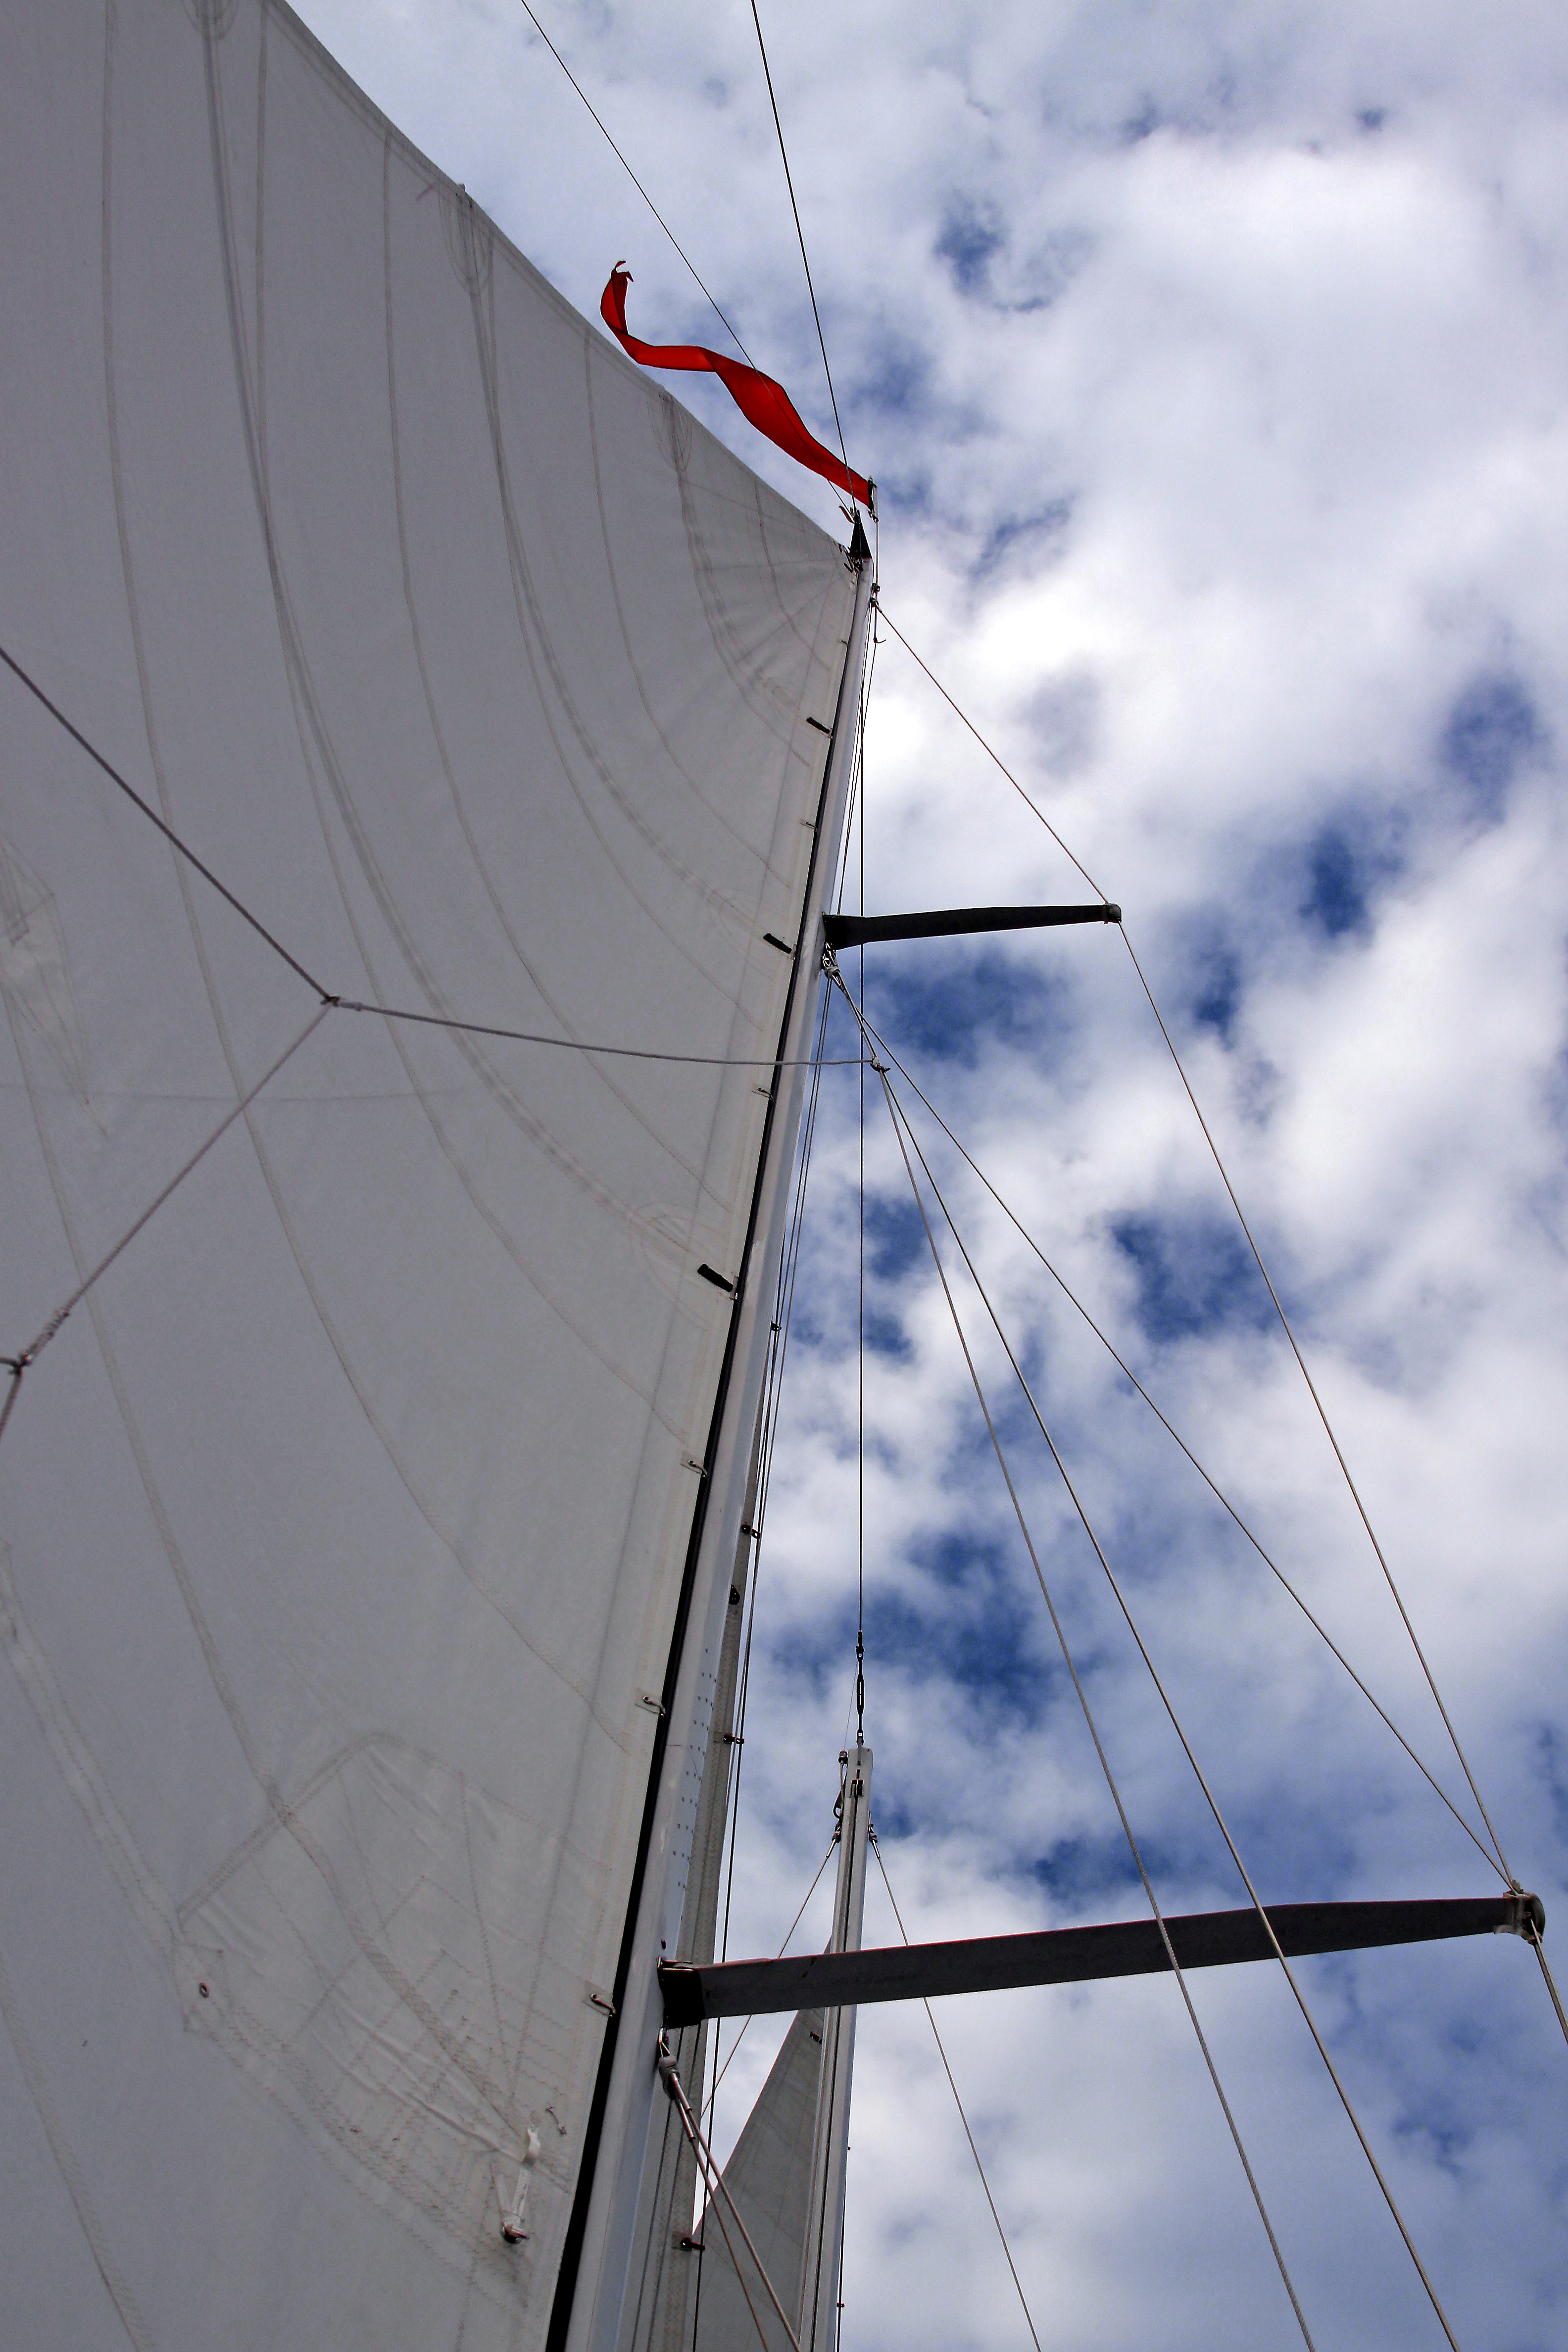 White Sails and rigging with blue skies full of white clouds